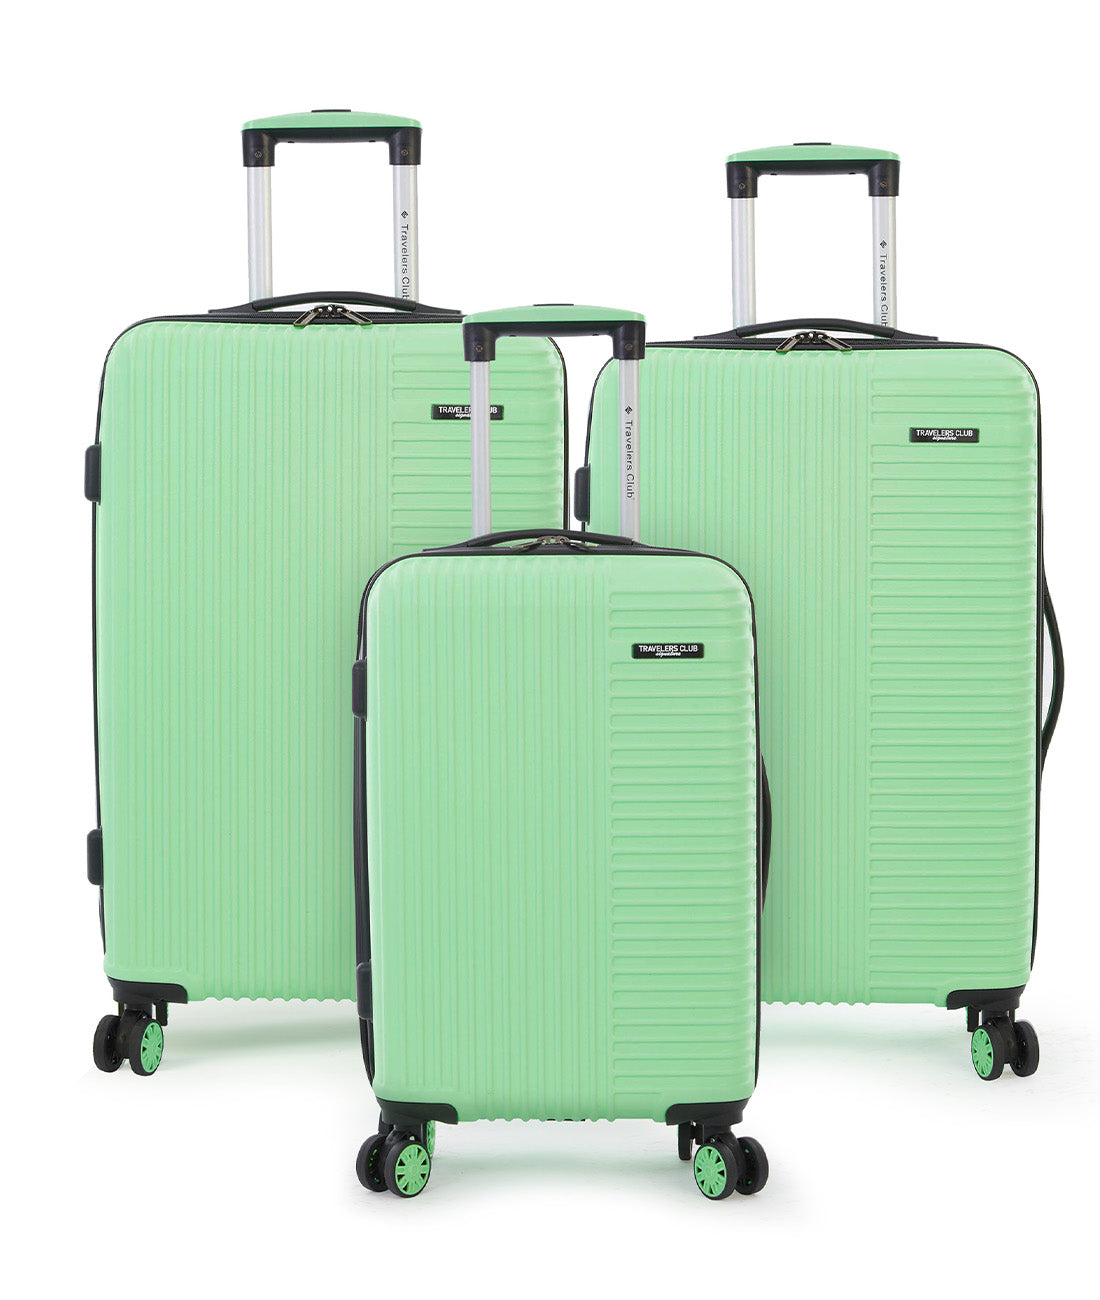 Travelers Club | Basette Collection | 3PC Luggage Set